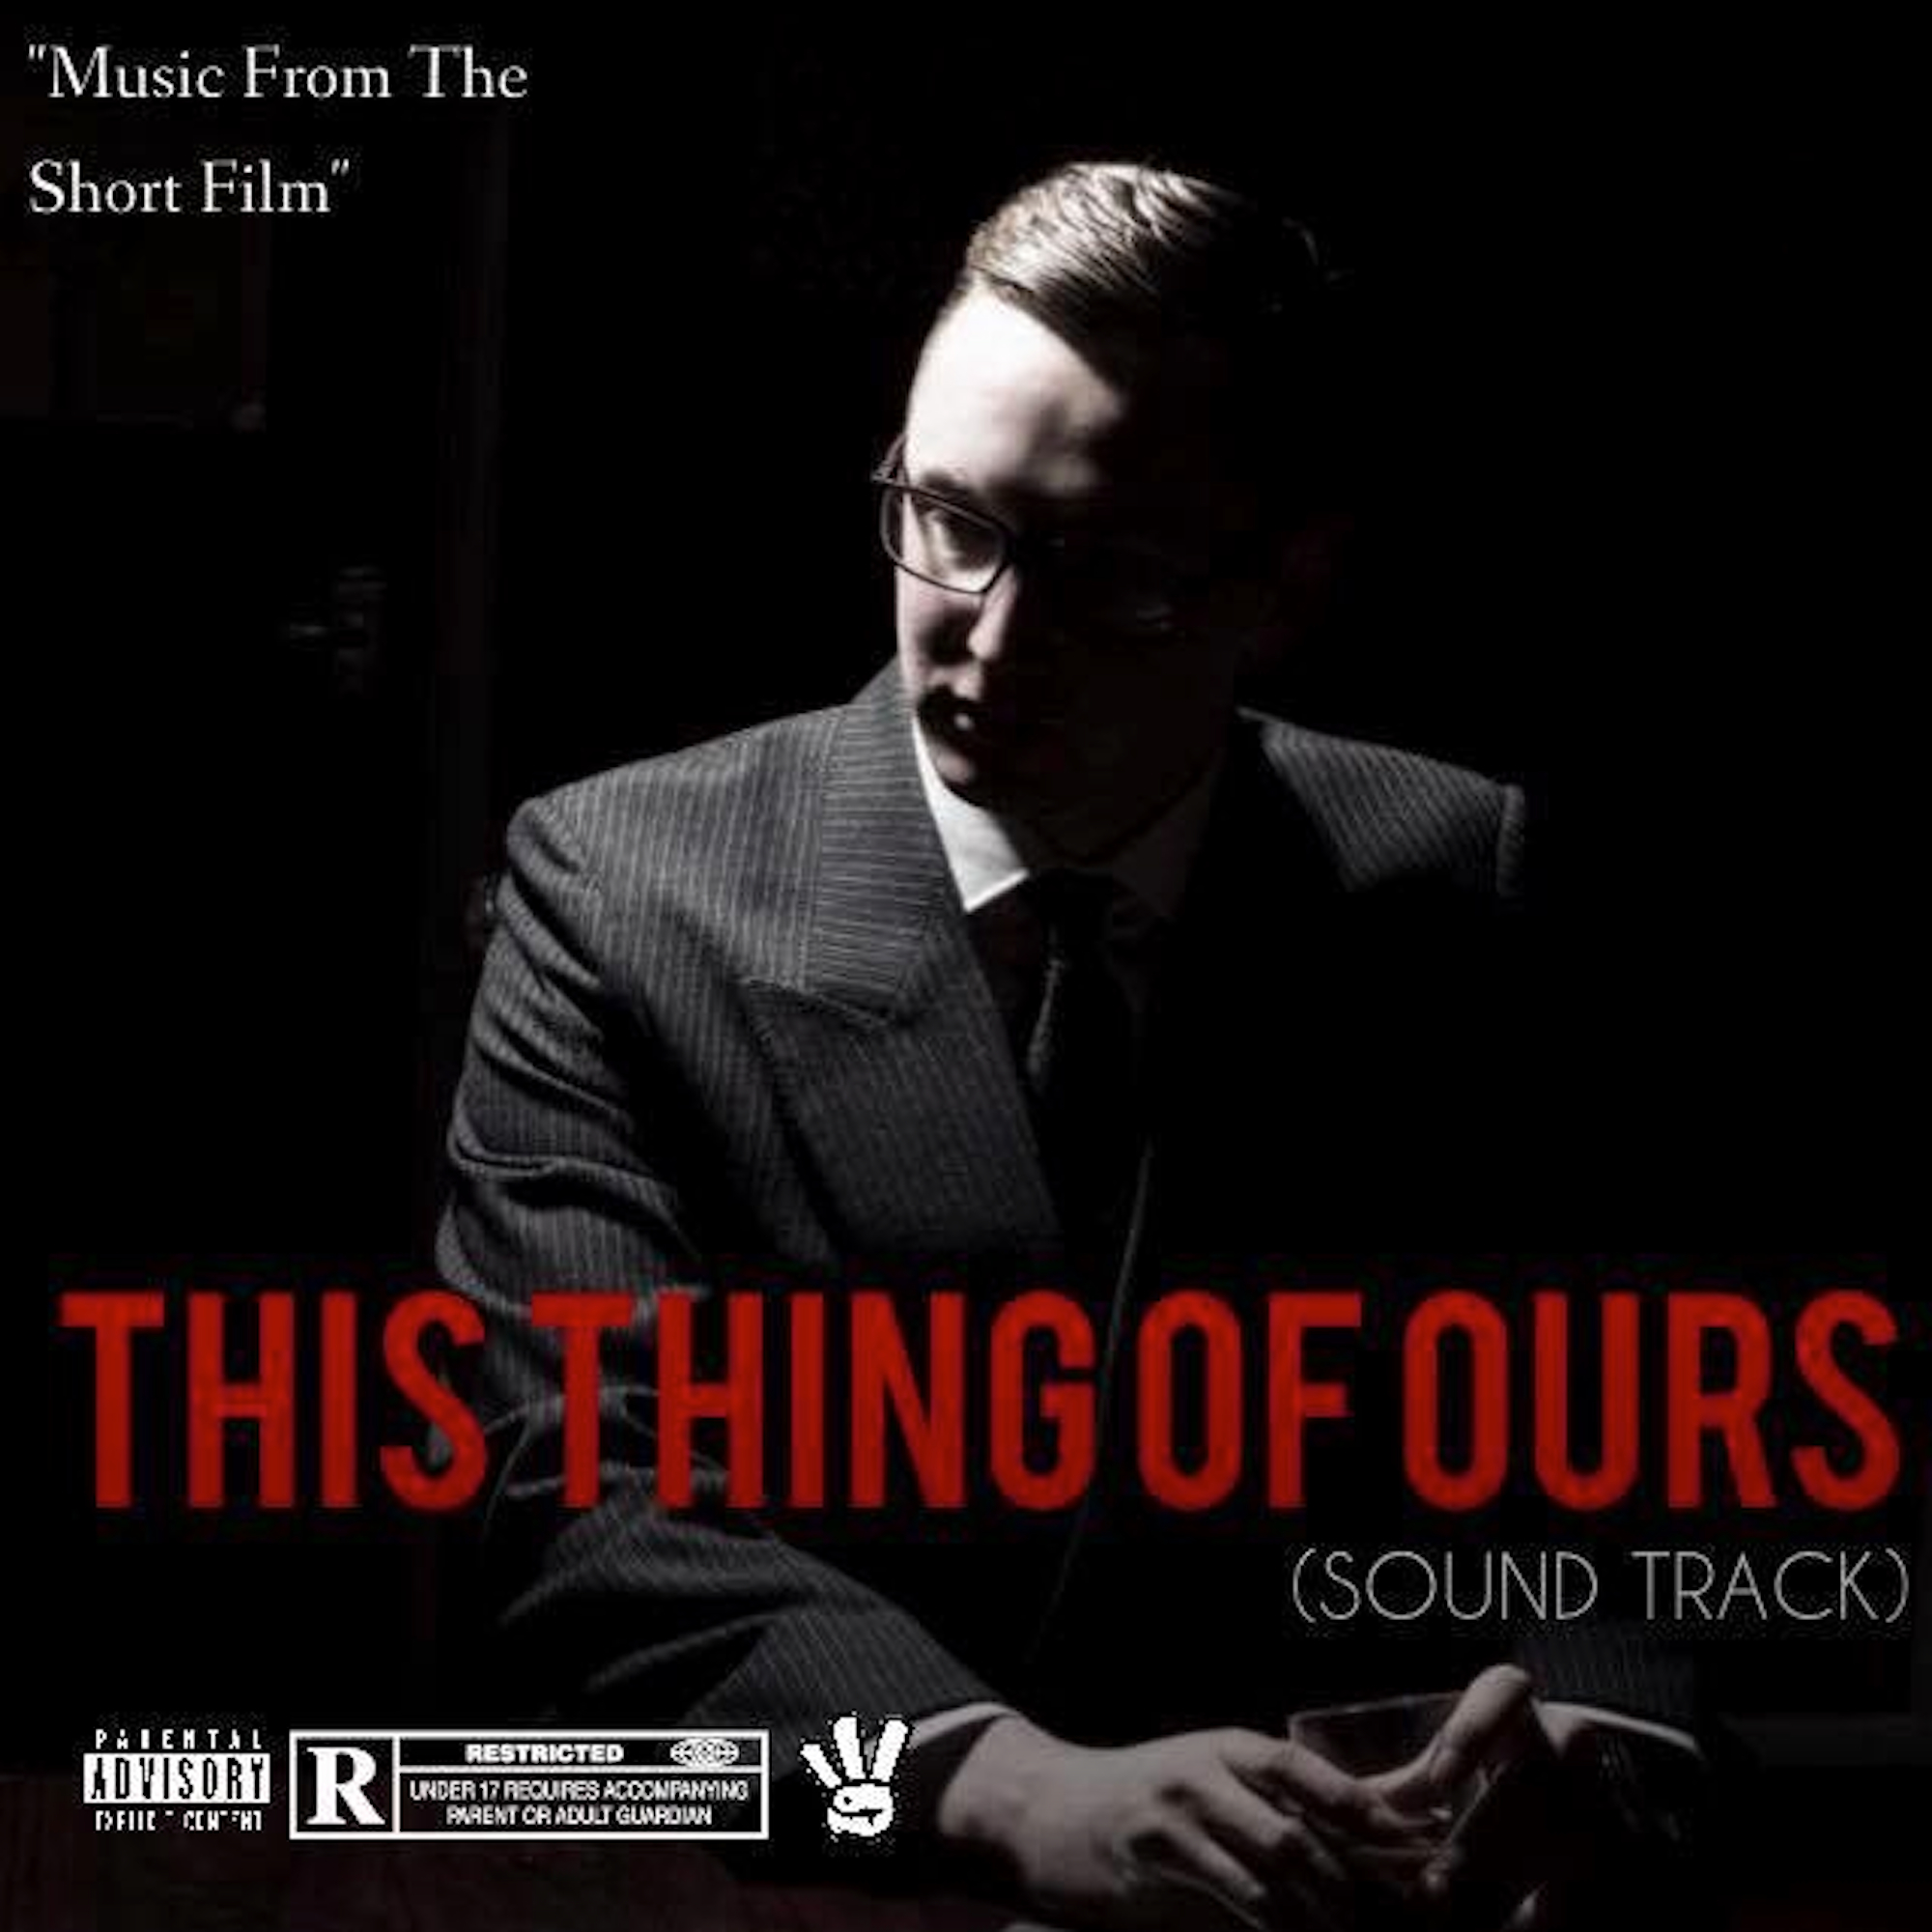 Marble floors Gold ceilings Music from Short Film " This Things of Ours